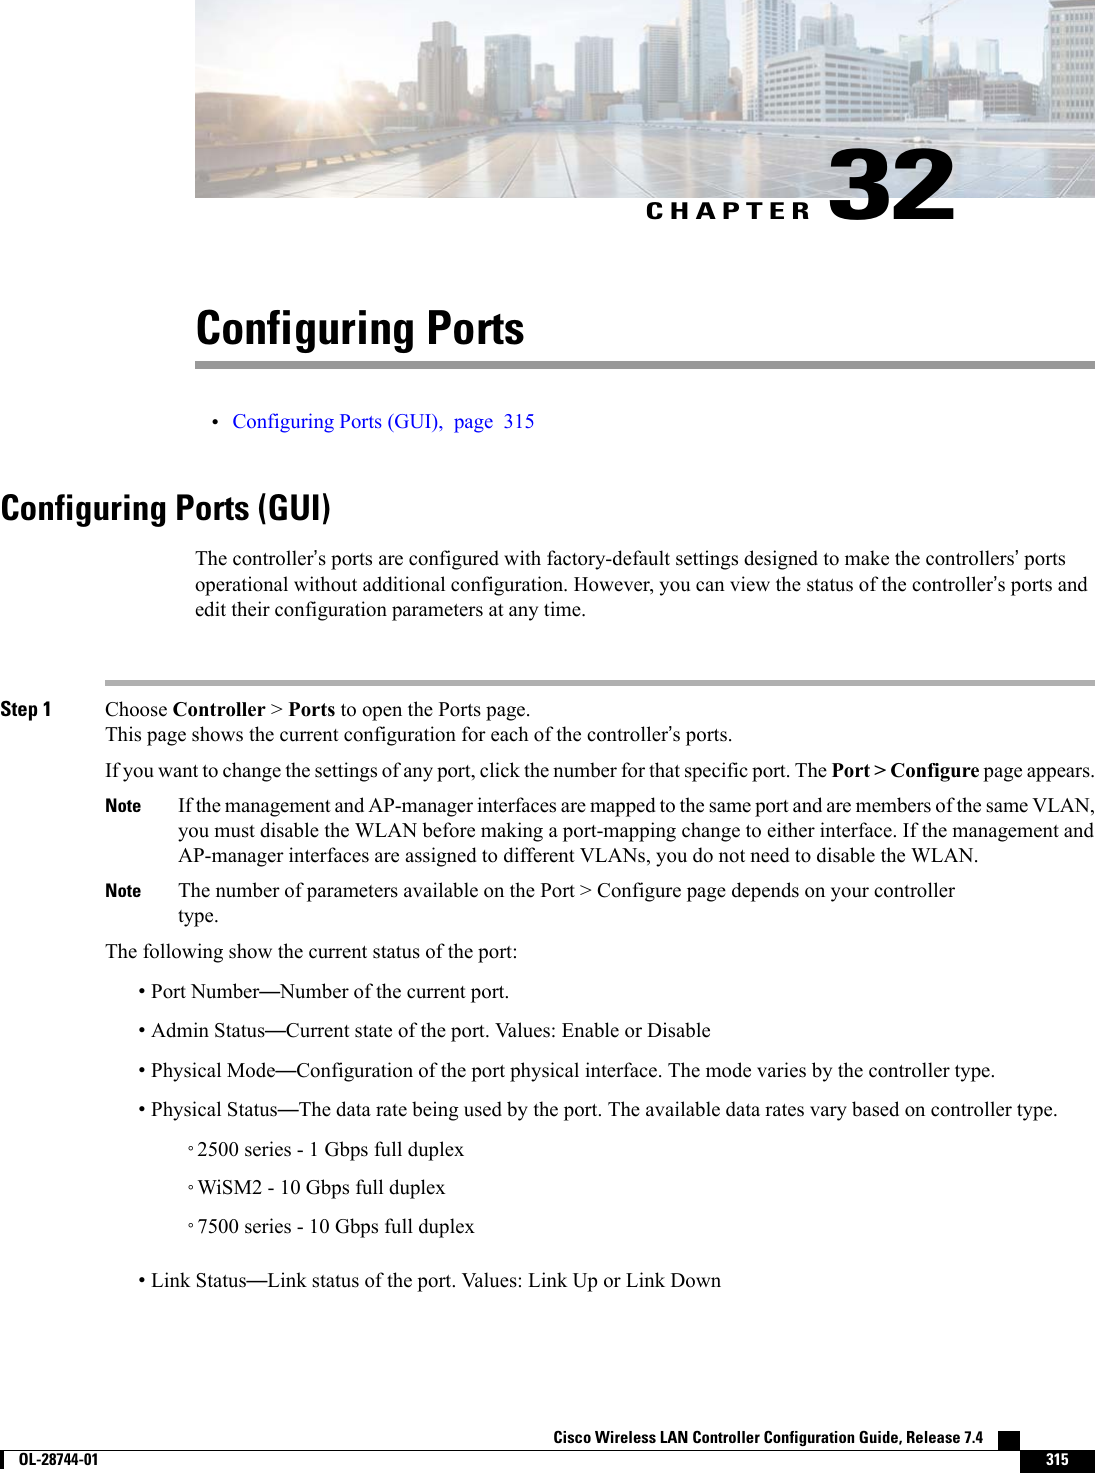 CHAPTER 32Configuring Ports•Configuring Ports (GUI), page 315Configuring Ports (GUI)The controller’s ports are configured with factory-default settings designed to make the controllers’portsoperational without additional configuration. However, you can view the status of the controller’s ports andedit their configuration parameters at any time.Step 1 Choose Controller &gt;Ports to open the Ports page.This page shows the current configuration for each of the controller’s ports.If you want to change the settings of any port, click the number for that specific port. The Port &gt; Configure page appears.If the management and AP-manager interfaces are mapped to the same port and are members of the same VLAN,you must disable the WLAN before making a port-mapping change to either interface. If the management andAP-manager interfaces are assigned to different VLANs, you do not need to disable the WLAN.NoteThe number of parameters available on the Port &gt; Configure page depends on your controllertype.NoteThe following show the current status of the port:•Port Number—Number of the current port.•Admin Status—Current state of the port. Values: Enable or Disable•Physical Mode—Configuration of the port physical interface. The mode varies by the controller type.•Physical Status—The data rate being used by the port. The available data rates vary based on controller type.◦2500 series - 1 Gbps full duplex◦WiSM2 - 10 Gbps full duplex◦7500 series - 10 Gbps full duplex•Link Status—Link status of the port. Values: Link Up or Link DownCisco Wireless LAN Controller Configuration Guide, Release 7.4        OL-28744-01 315